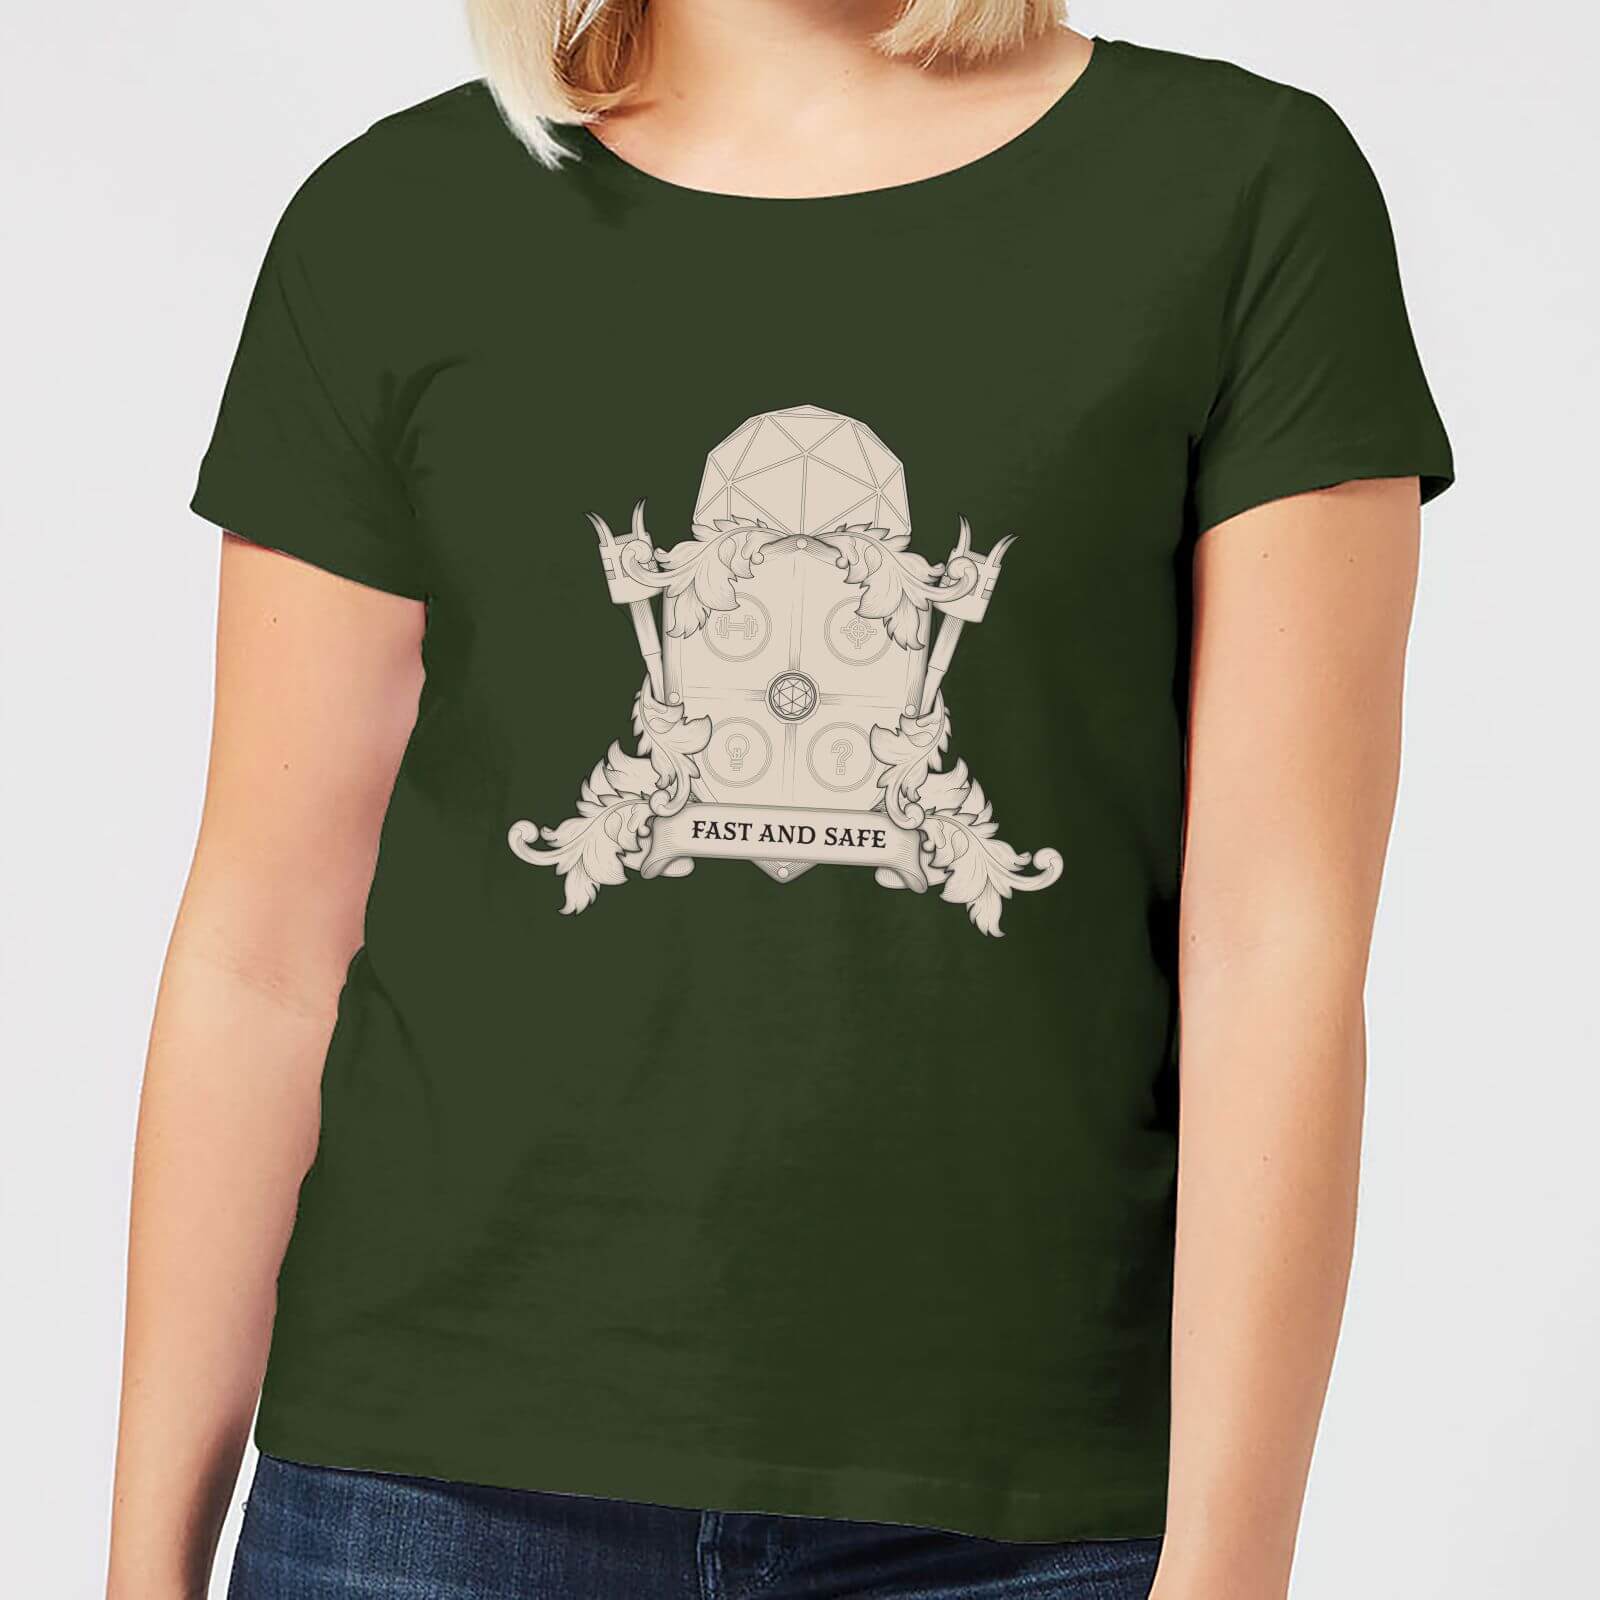 Crystal Maze Fast And Safe Crest Women's T-Shirt - Forest Green - S - Forest Green